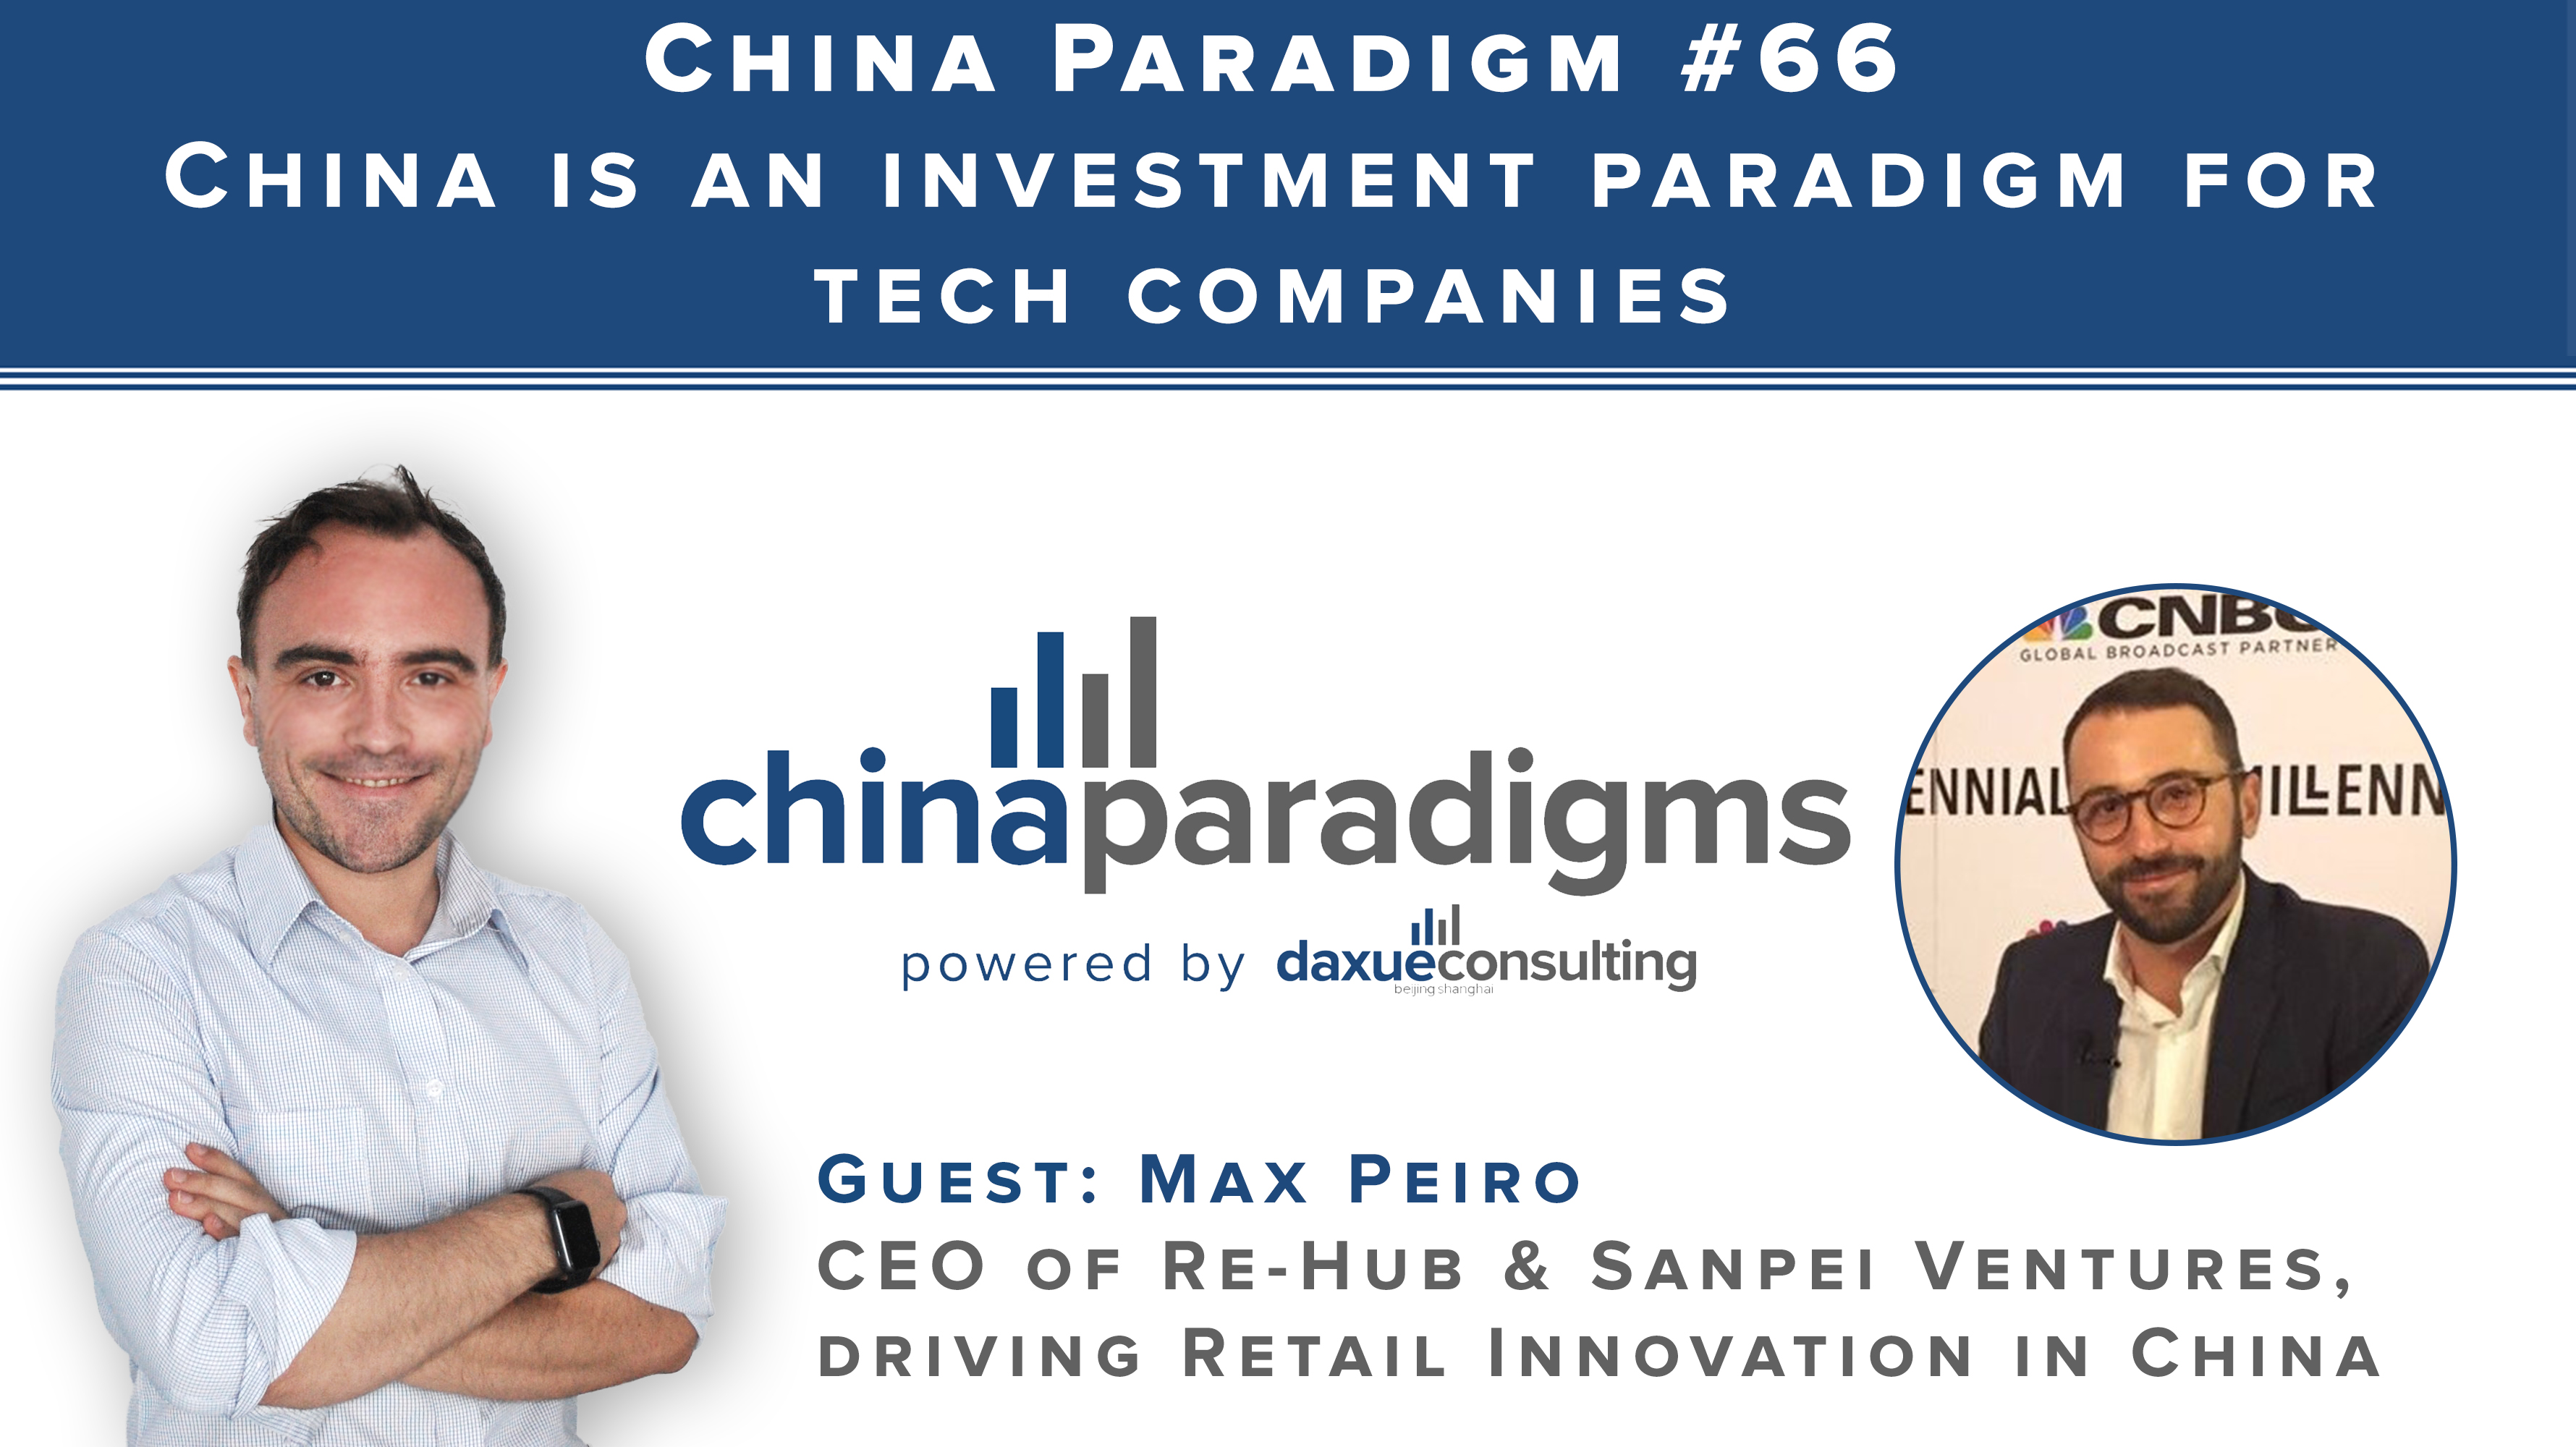 China Paradigm 66: China is an investment paradigm for tech companies